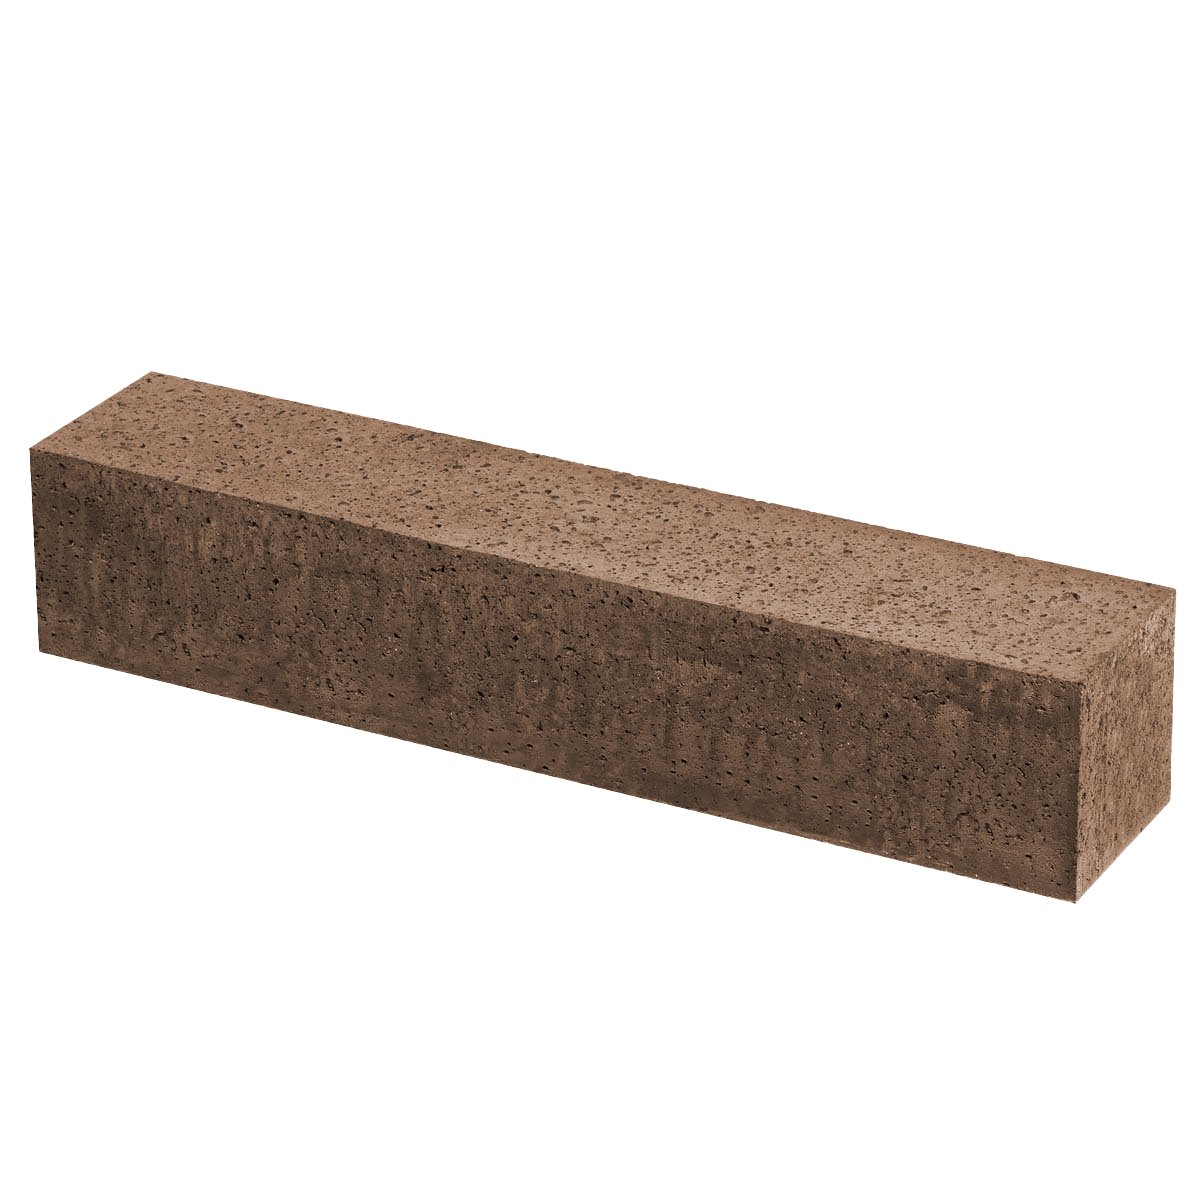 Gardenlux Stapelelement Taupe 75 x 15 x 15 cm - 